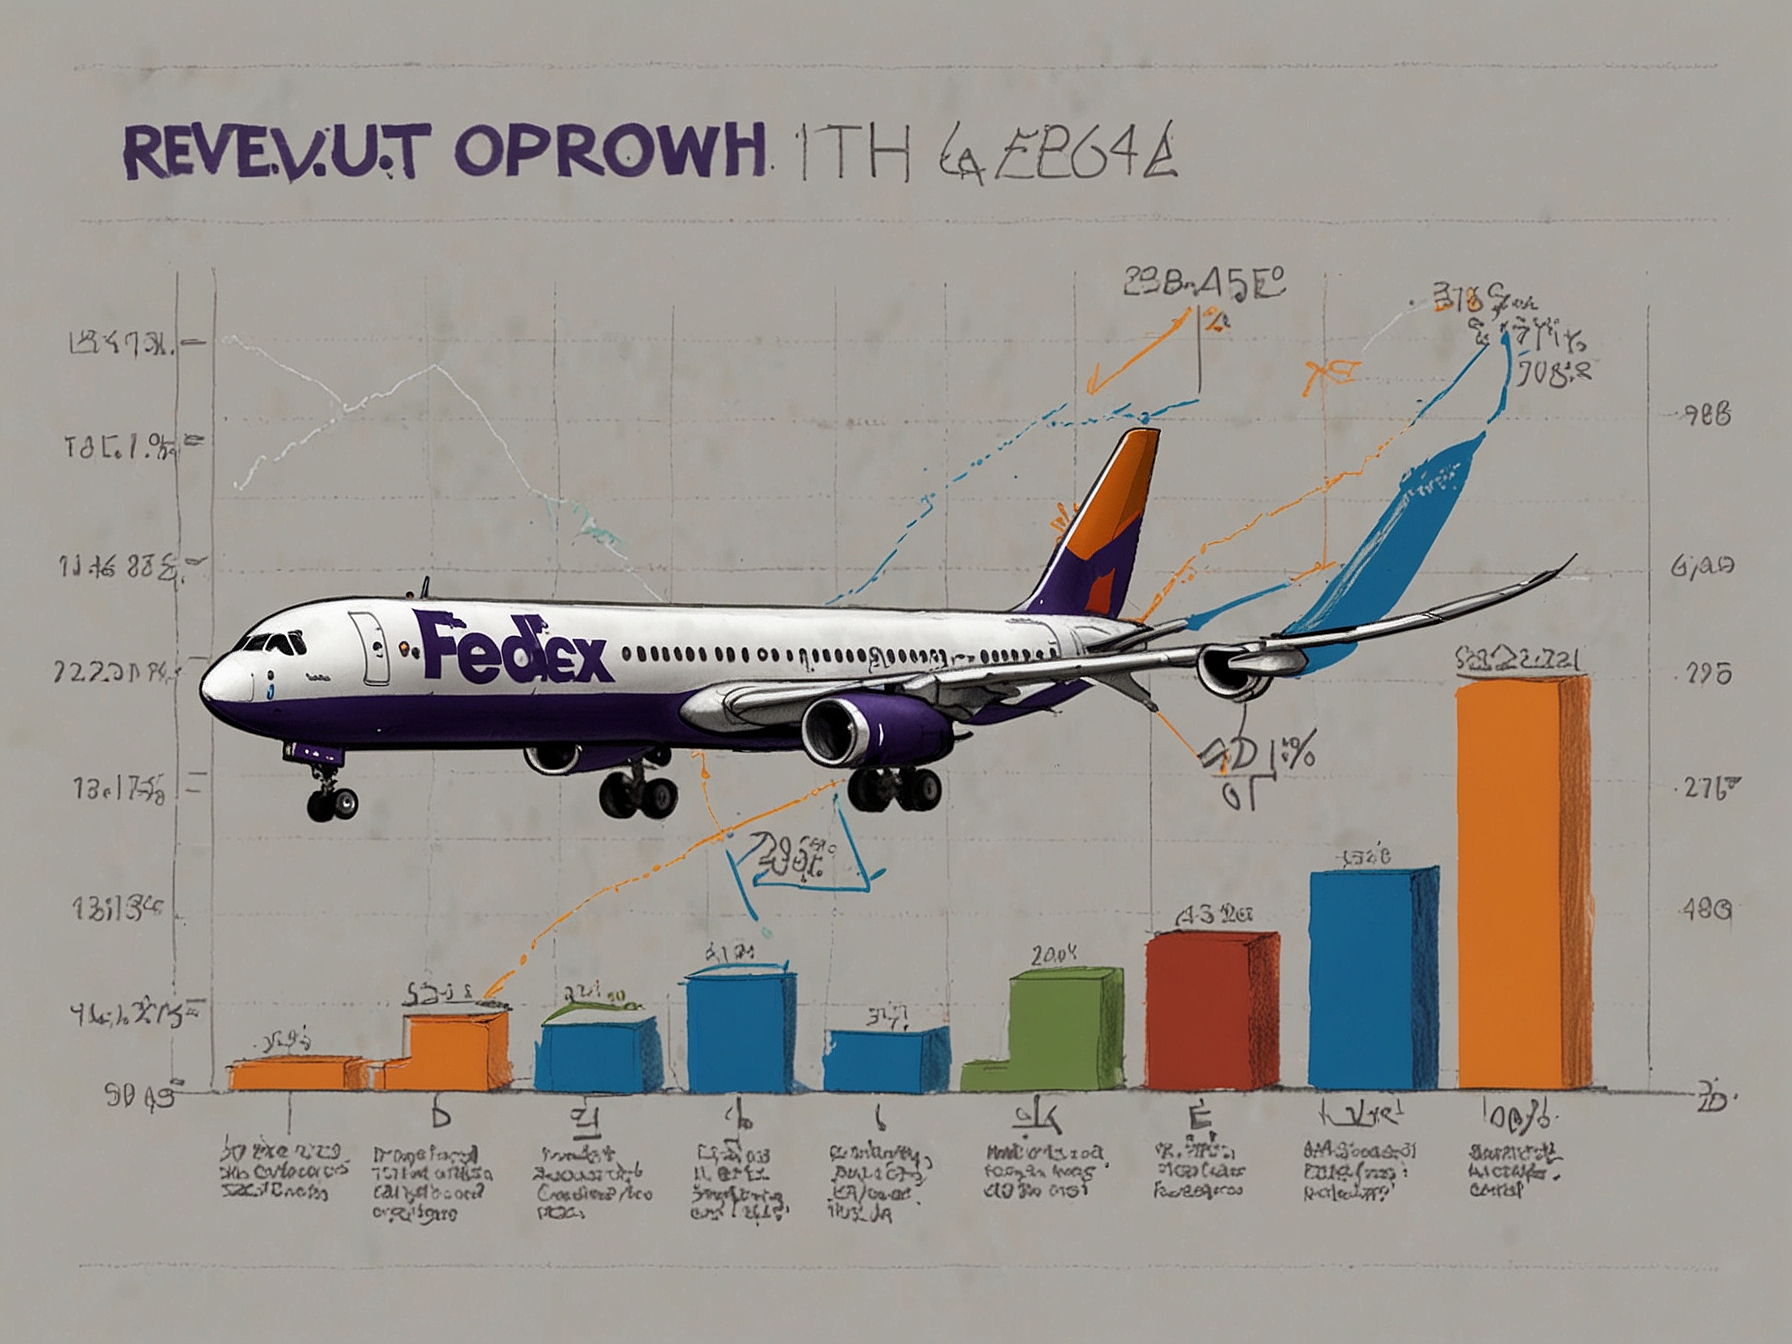 A graph displaying FedEx's revenue growth for Q4 2024, showing a 10% increase compared to the previous year, alongside key financial metrics like operating income and net income increases.